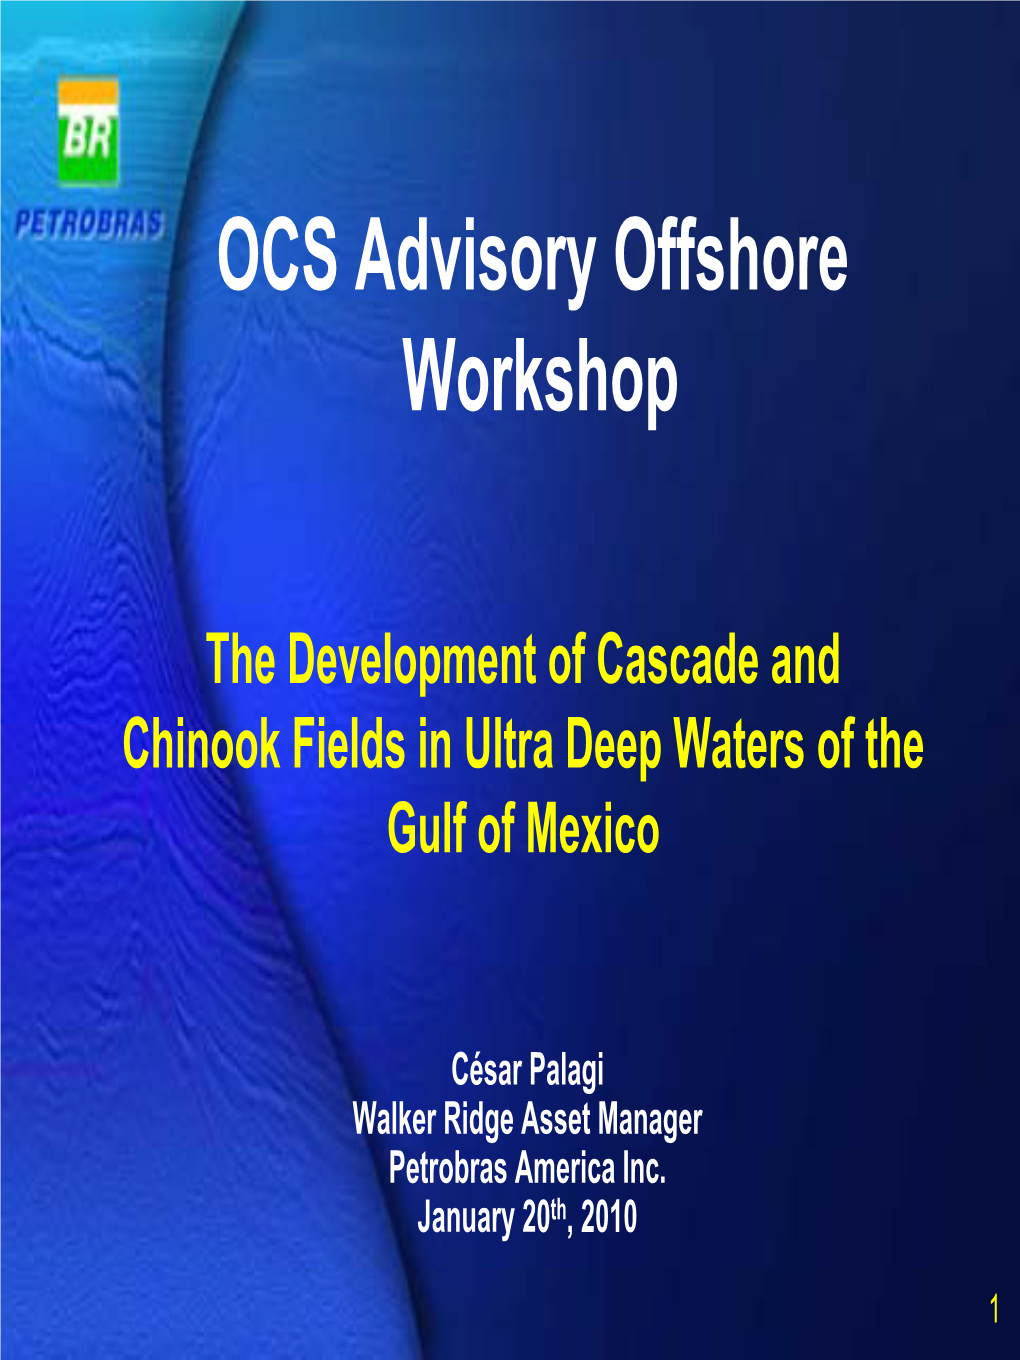 The Development of Cascade and Chinook Fields in Ultra Deep Waters of the Gulf of Mexico